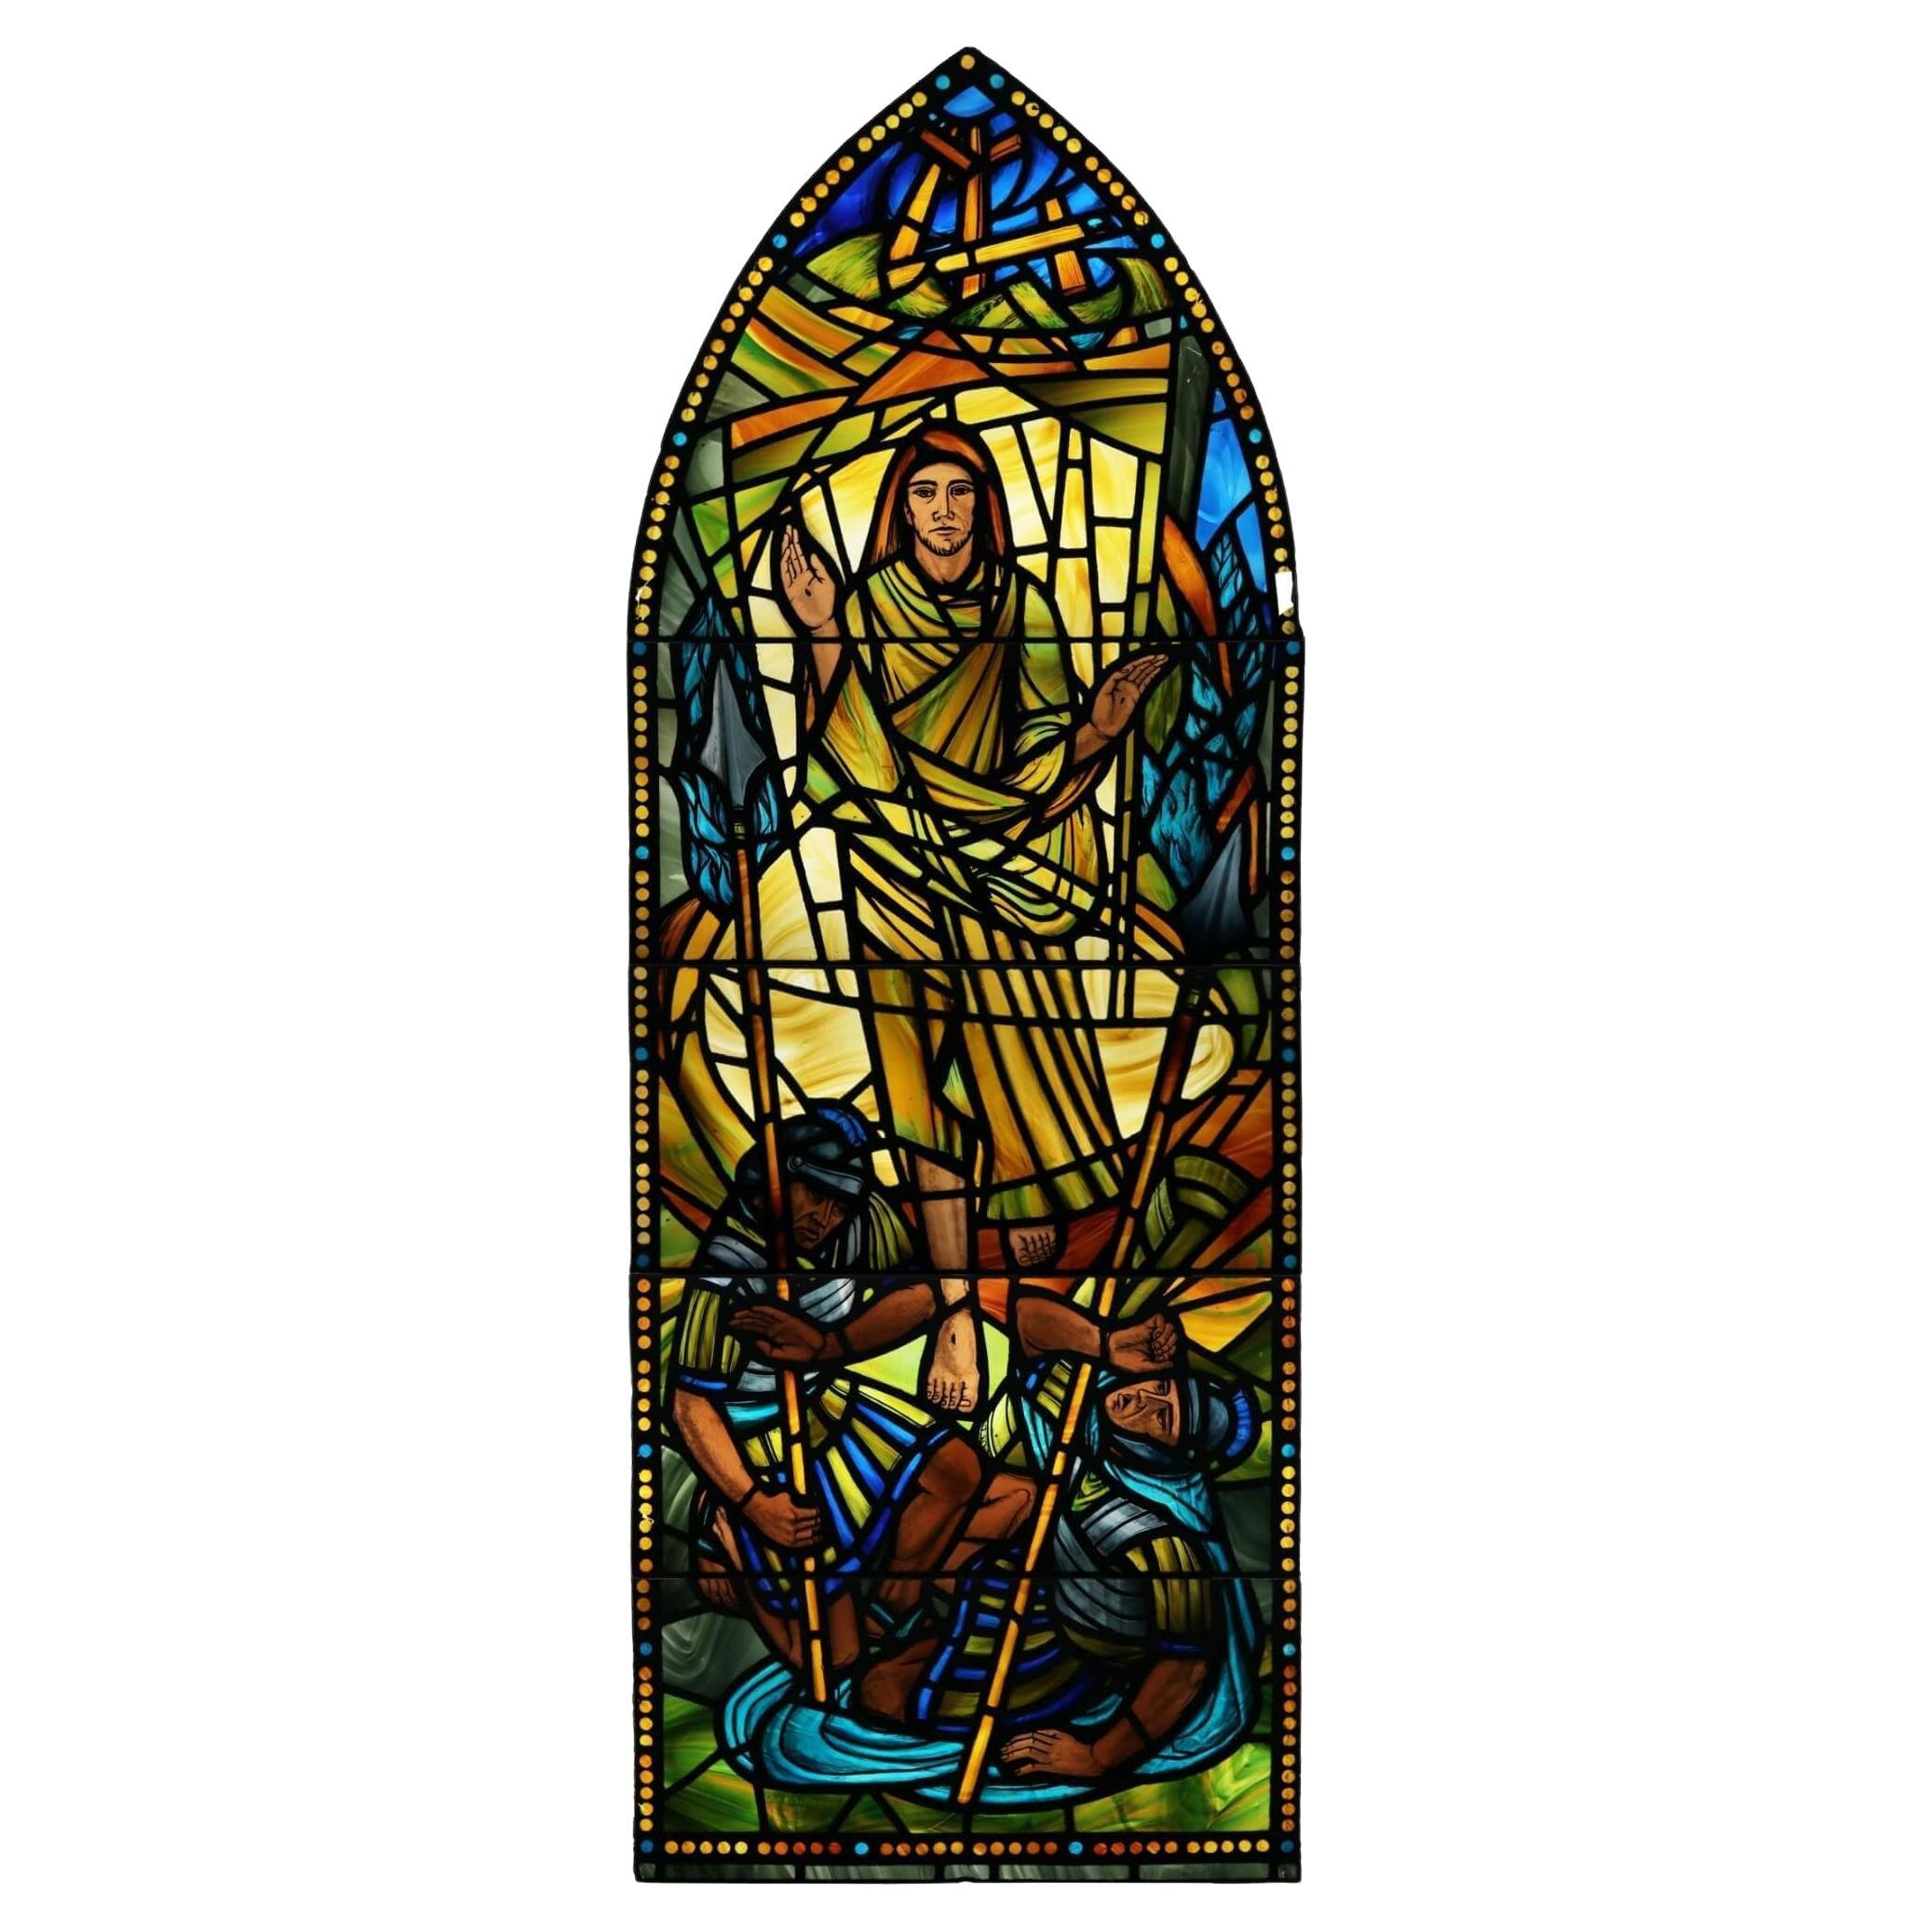 Ecclesiastical Stained Glass Window For Sale